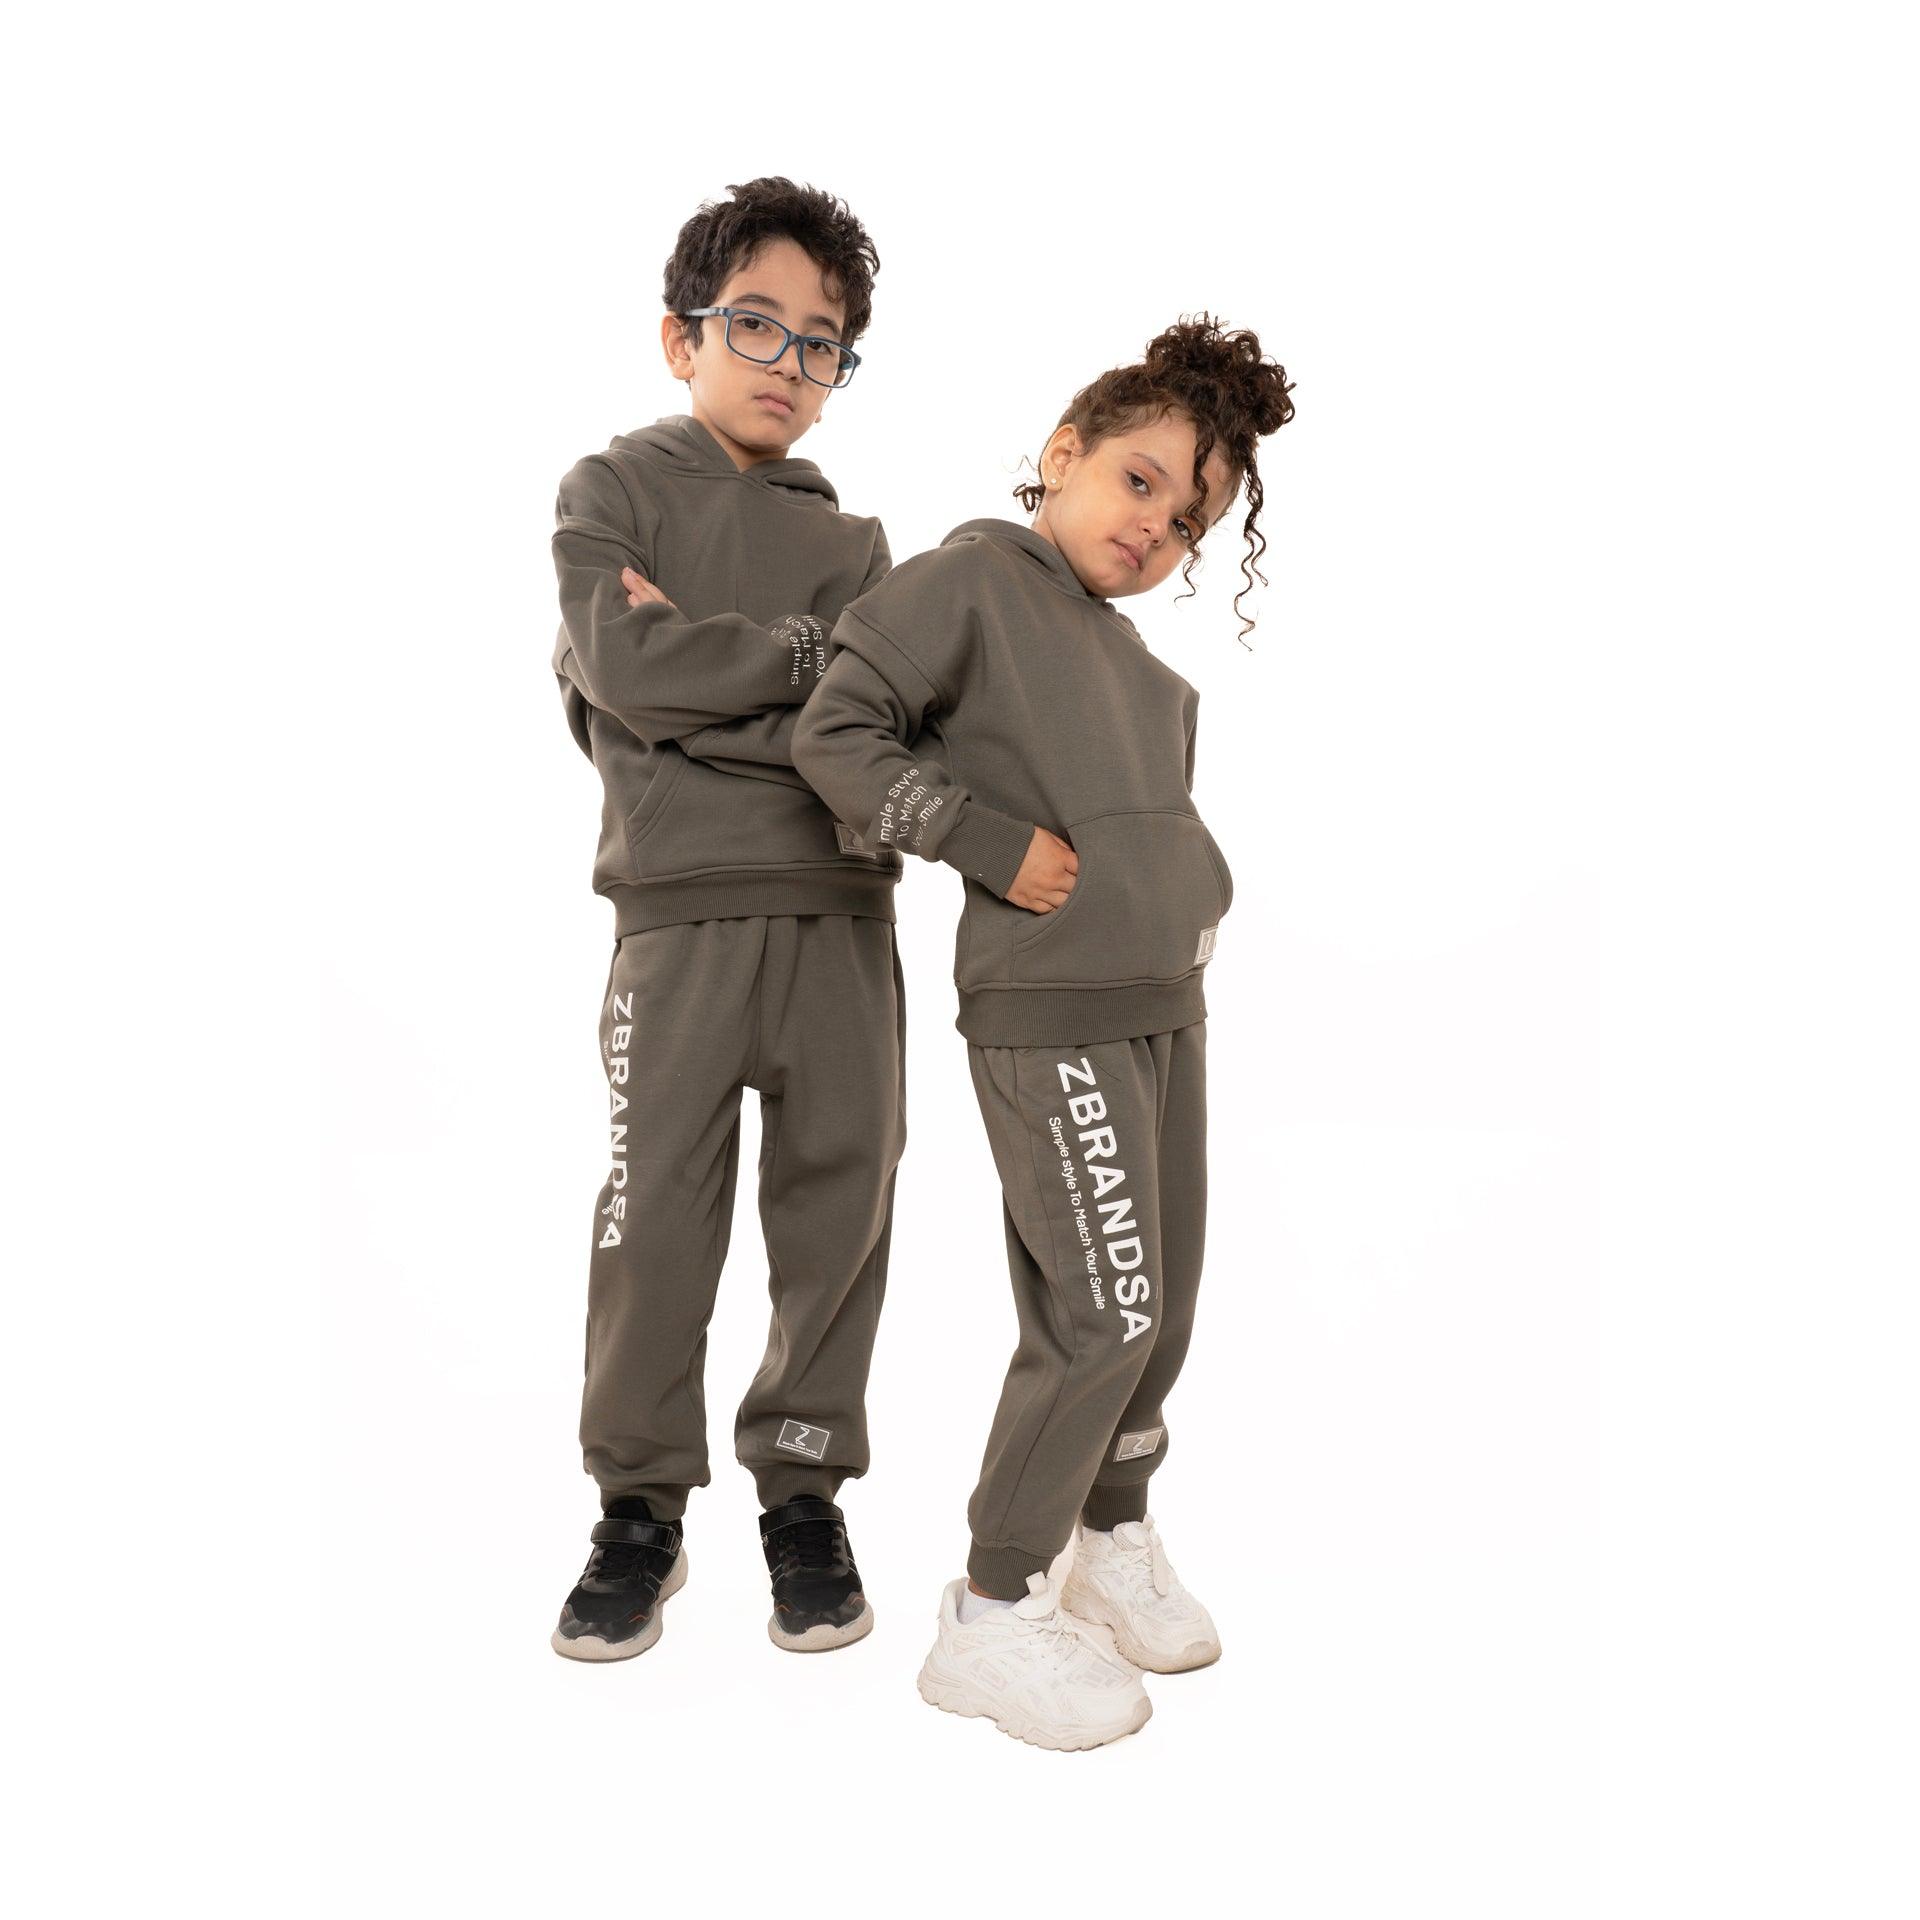 kids¬†set Gray hoodie and pants From Z Brand - WECRE8